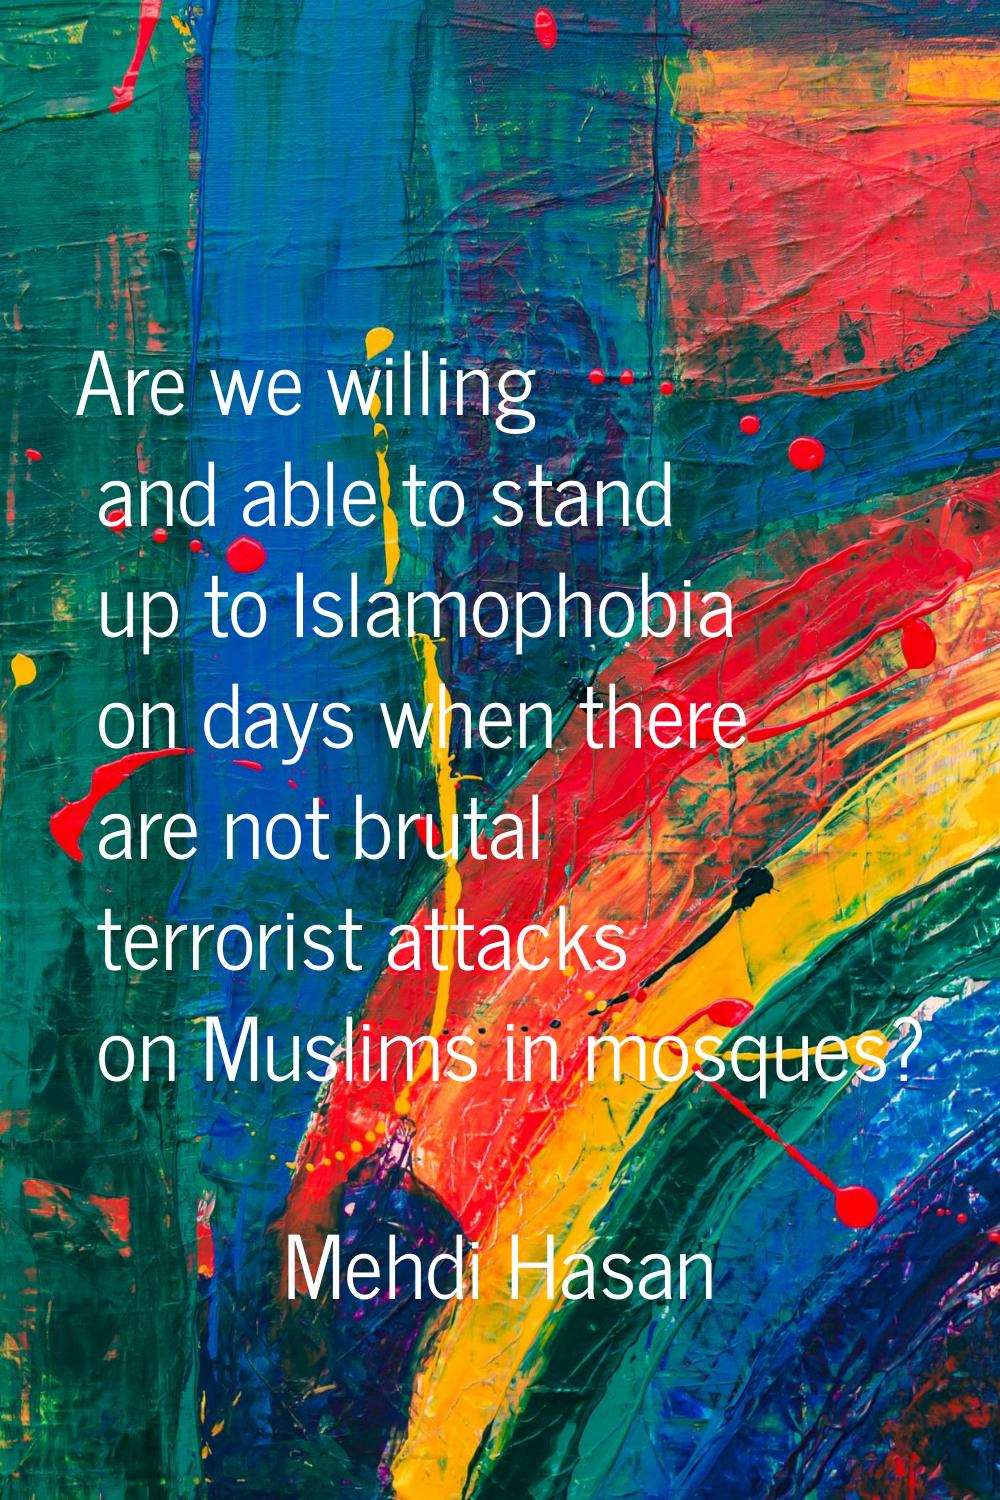 Are we willing and able to stand up to Islamophobia on days when there are not brutal terrorist att